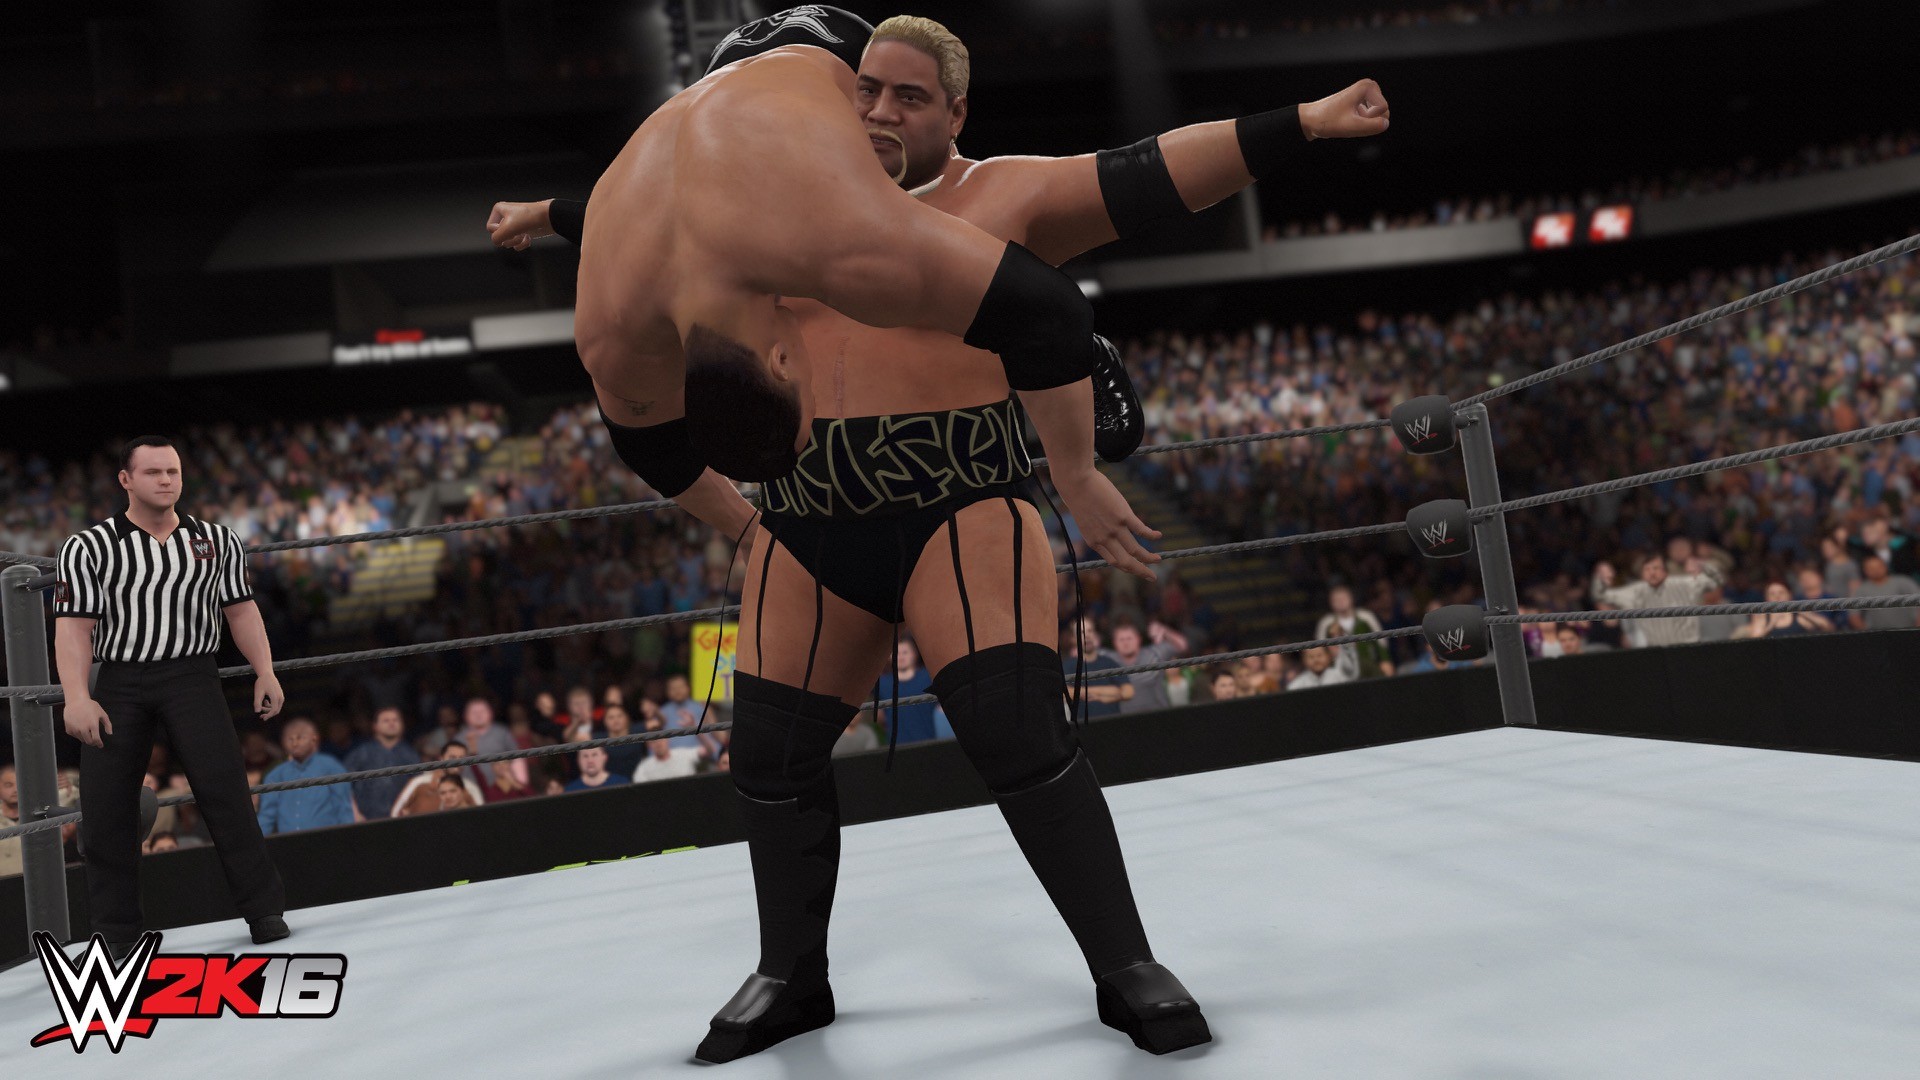 WWE 2K16's galleries. All Images